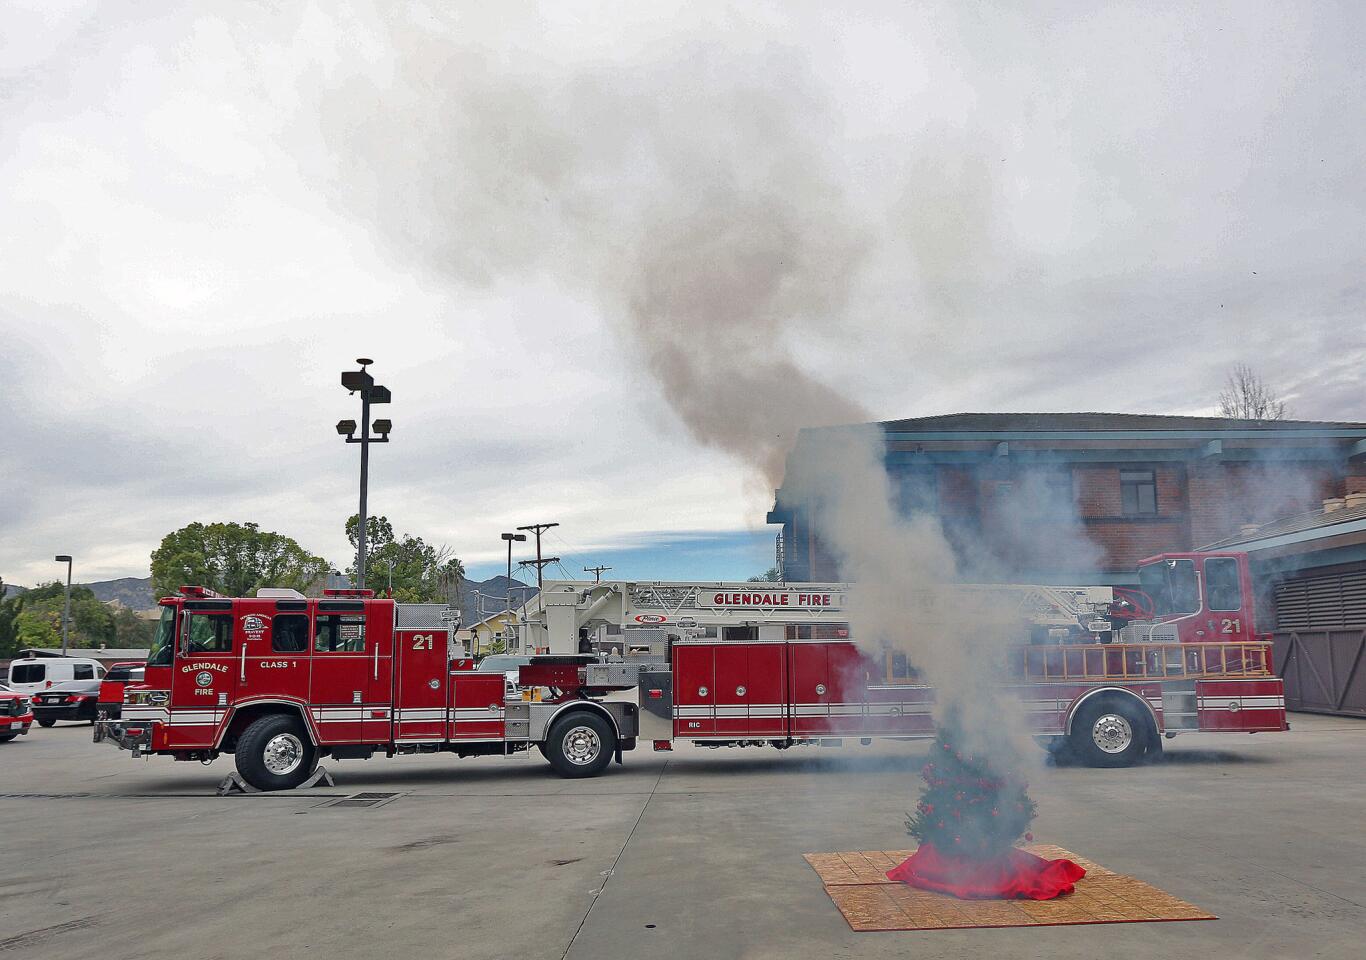 Photo Gallery: Glendale Fire Department demonstrates hazards around home during holidays